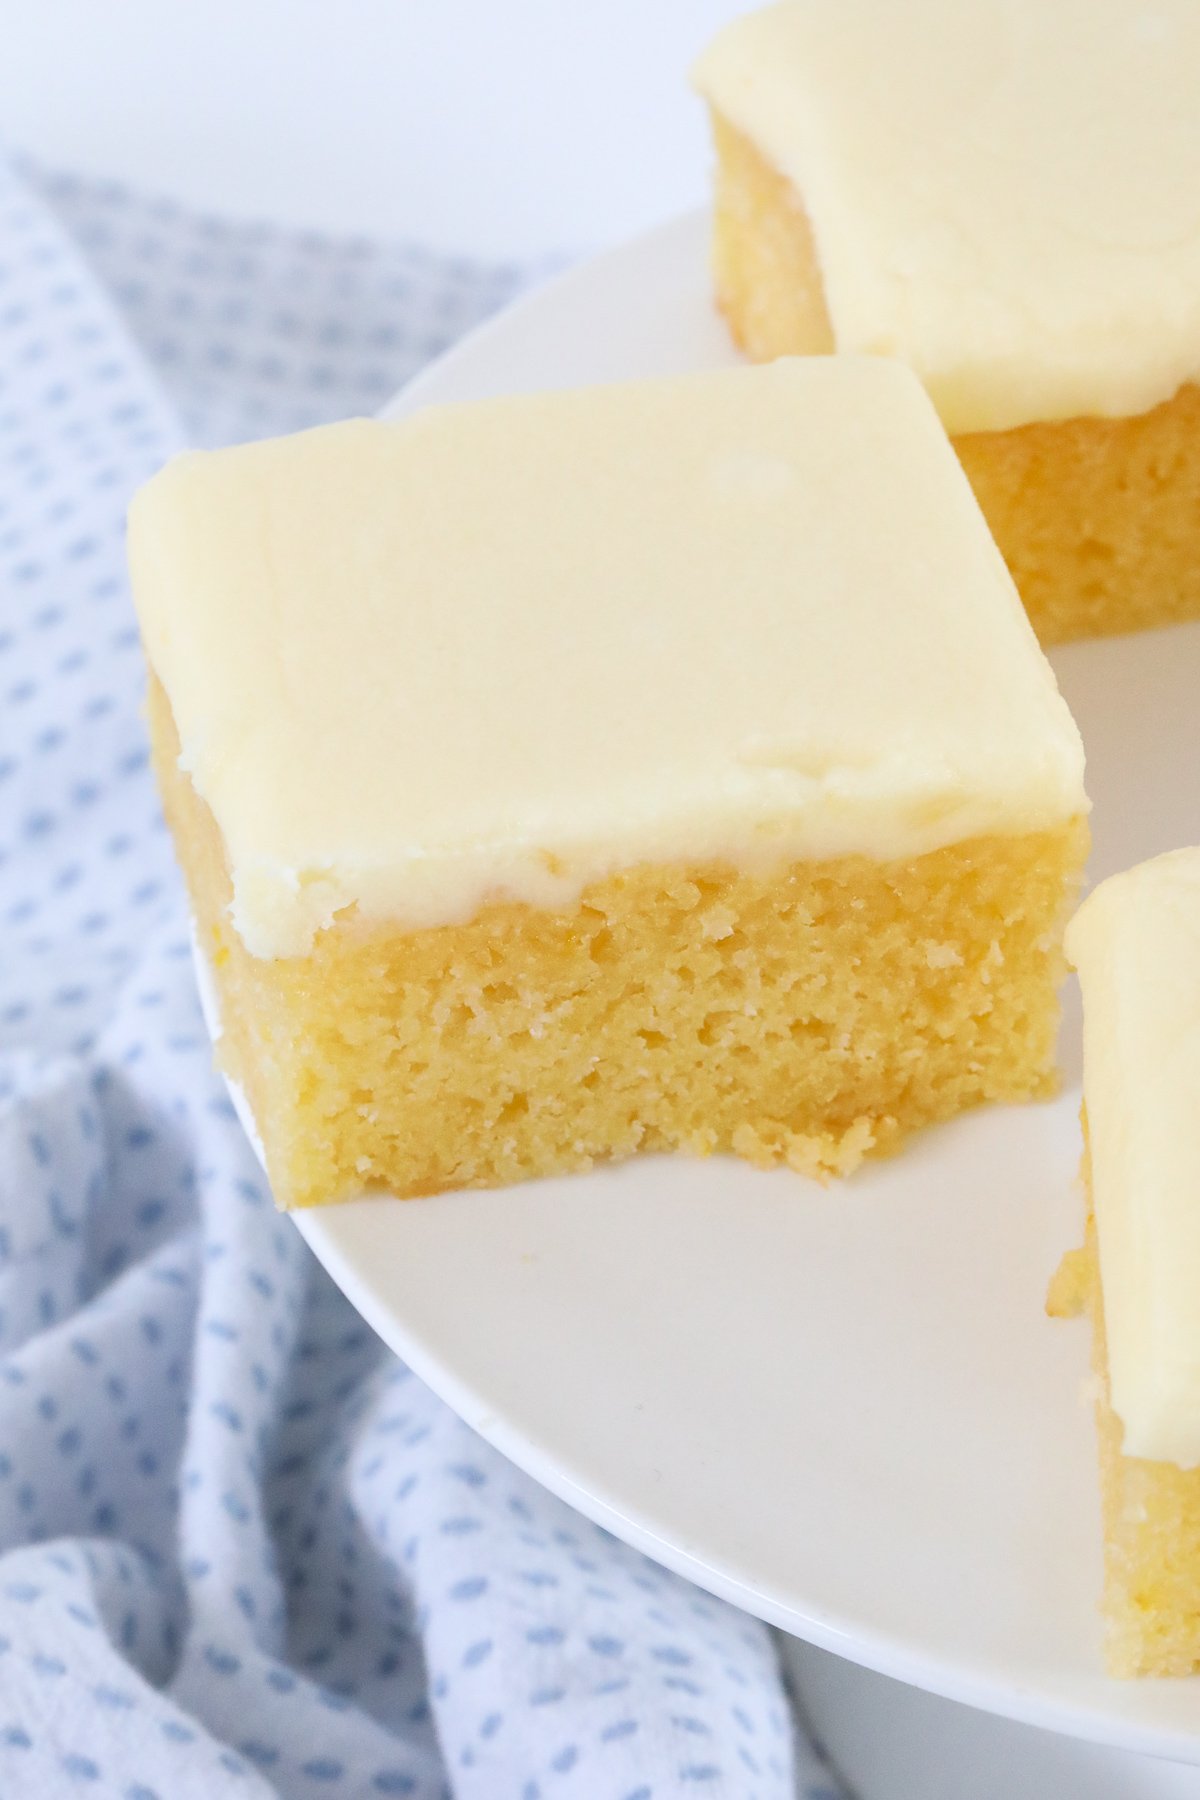 A close up of baked slice with lemon frosting on top